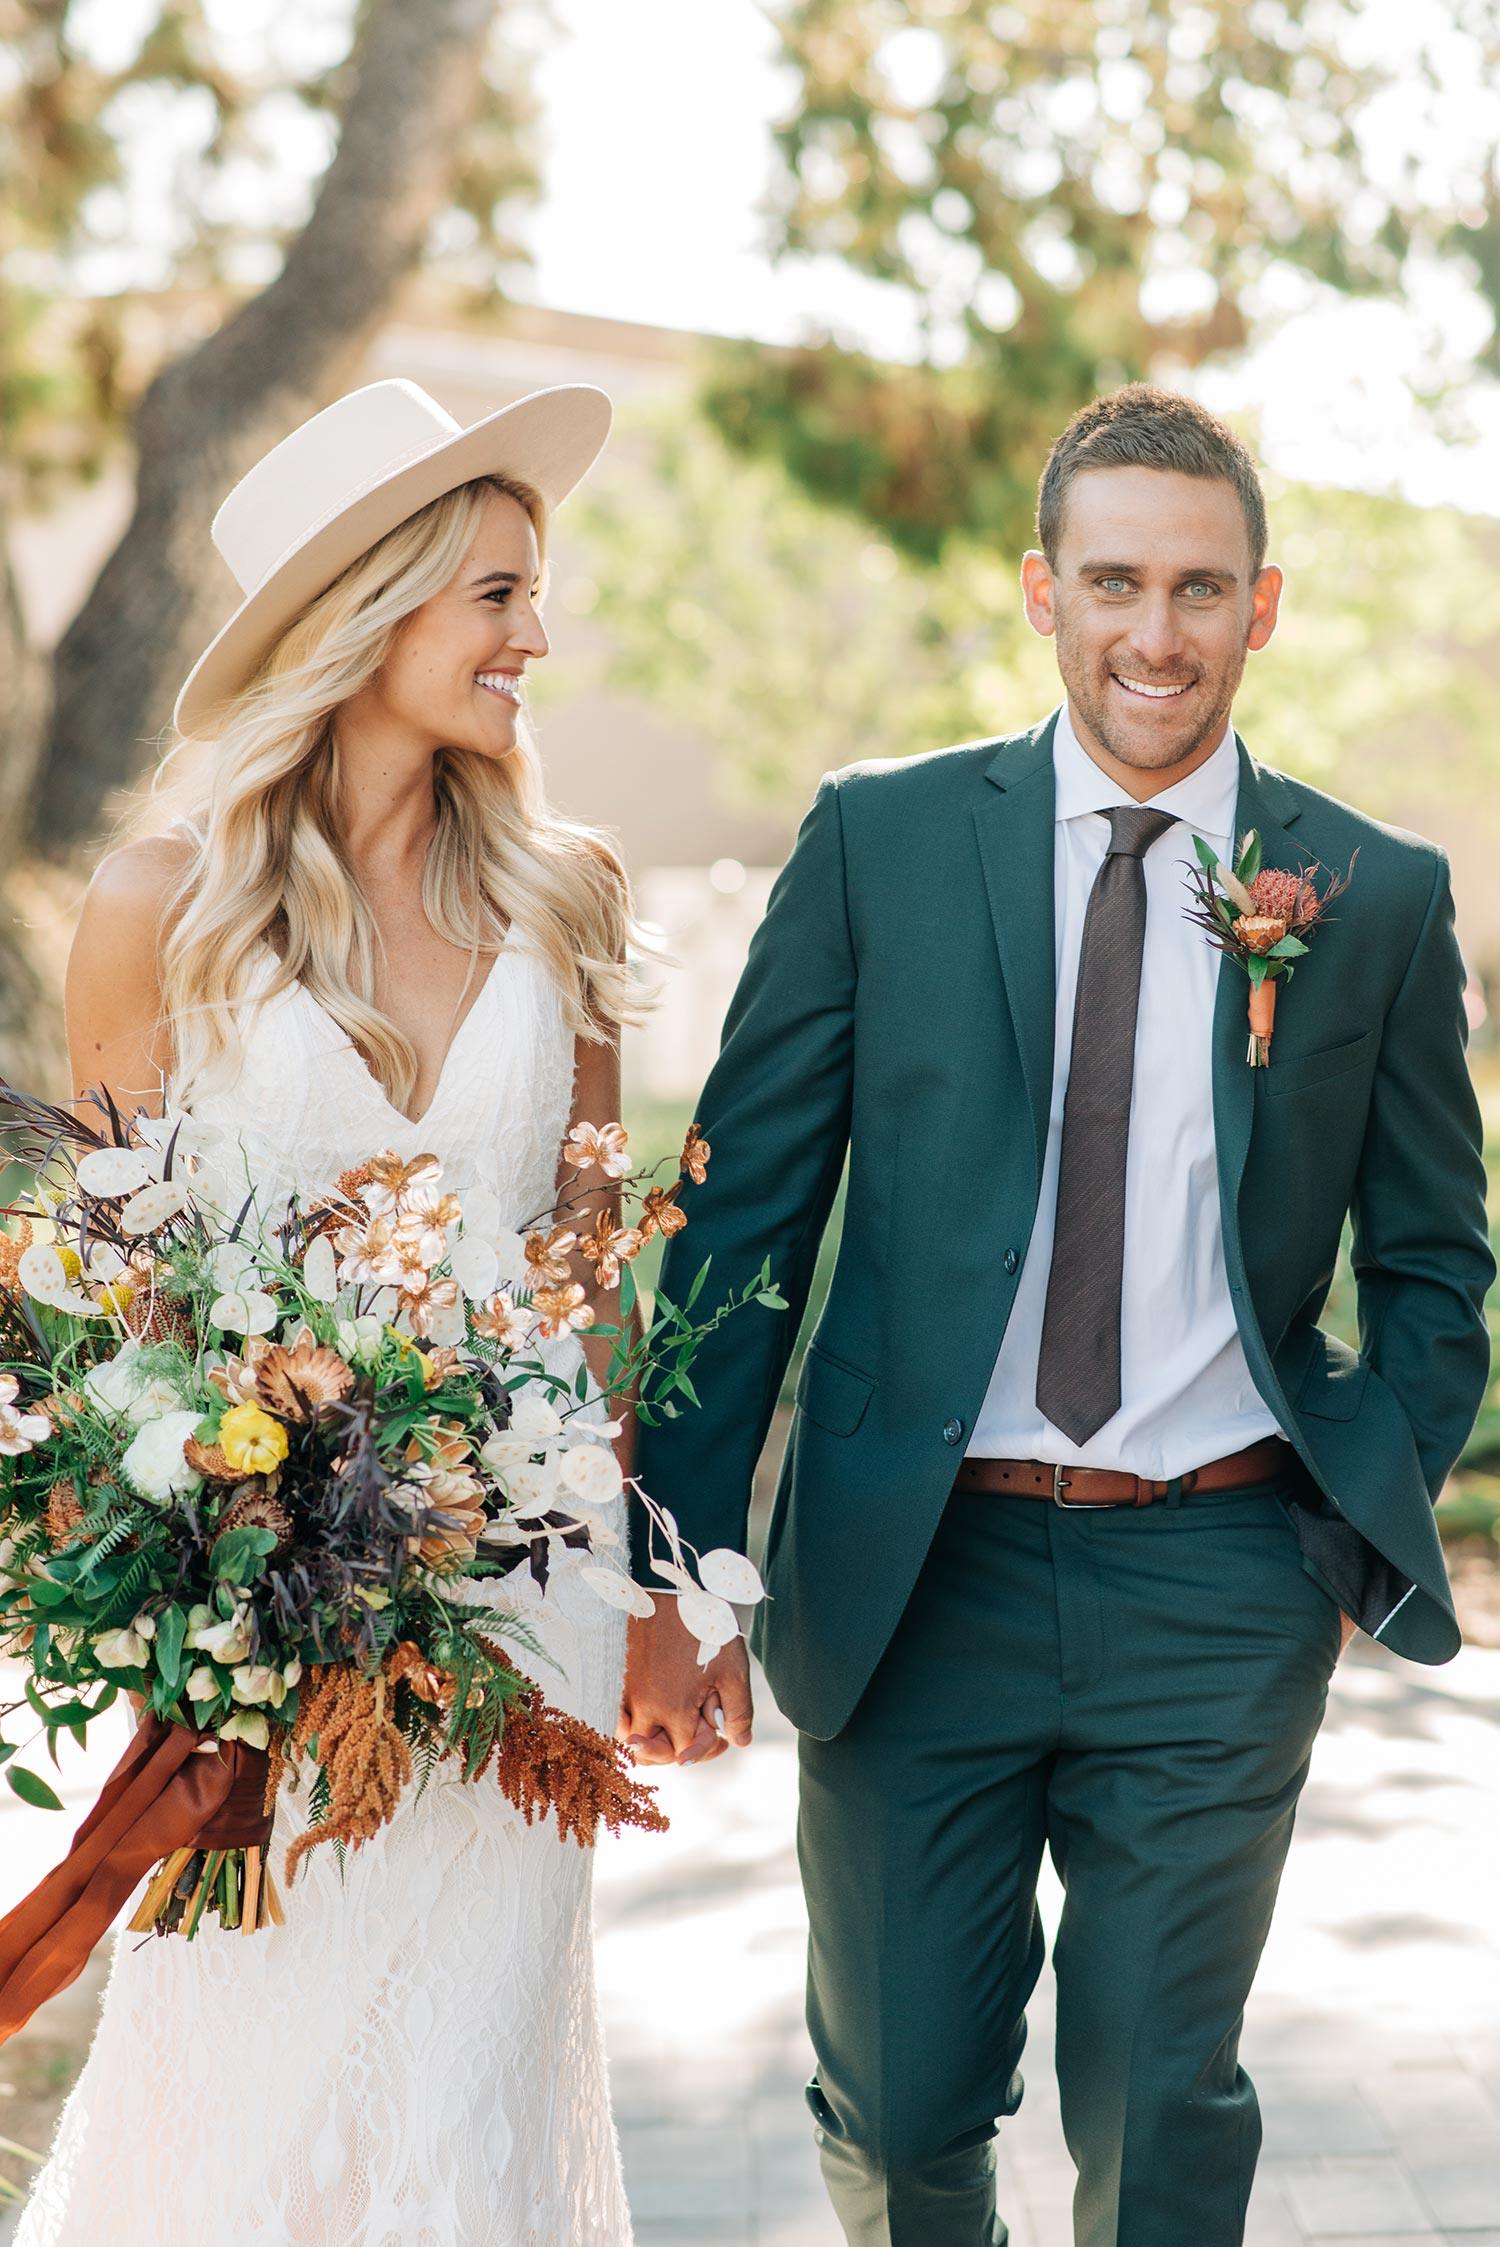 19 lovely Bride and Groom dress combinations - Stylebees.com